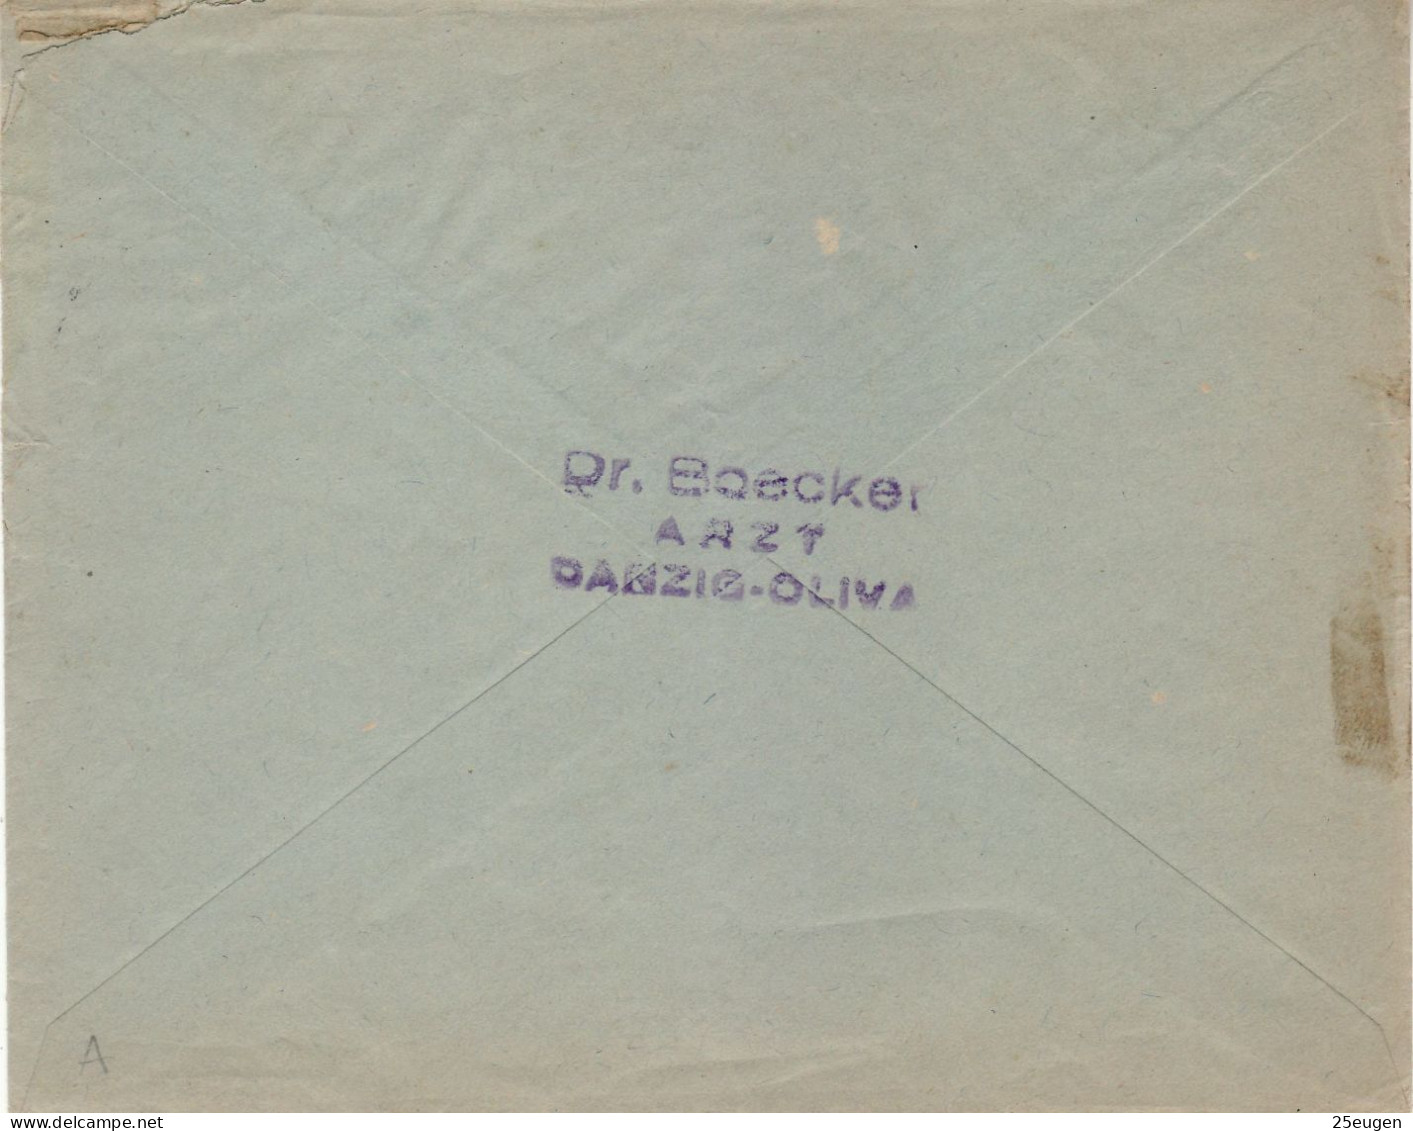 DANZIG 1937  LETTER SENT FROM OLIVA TO DANZIG - Covers & Documents